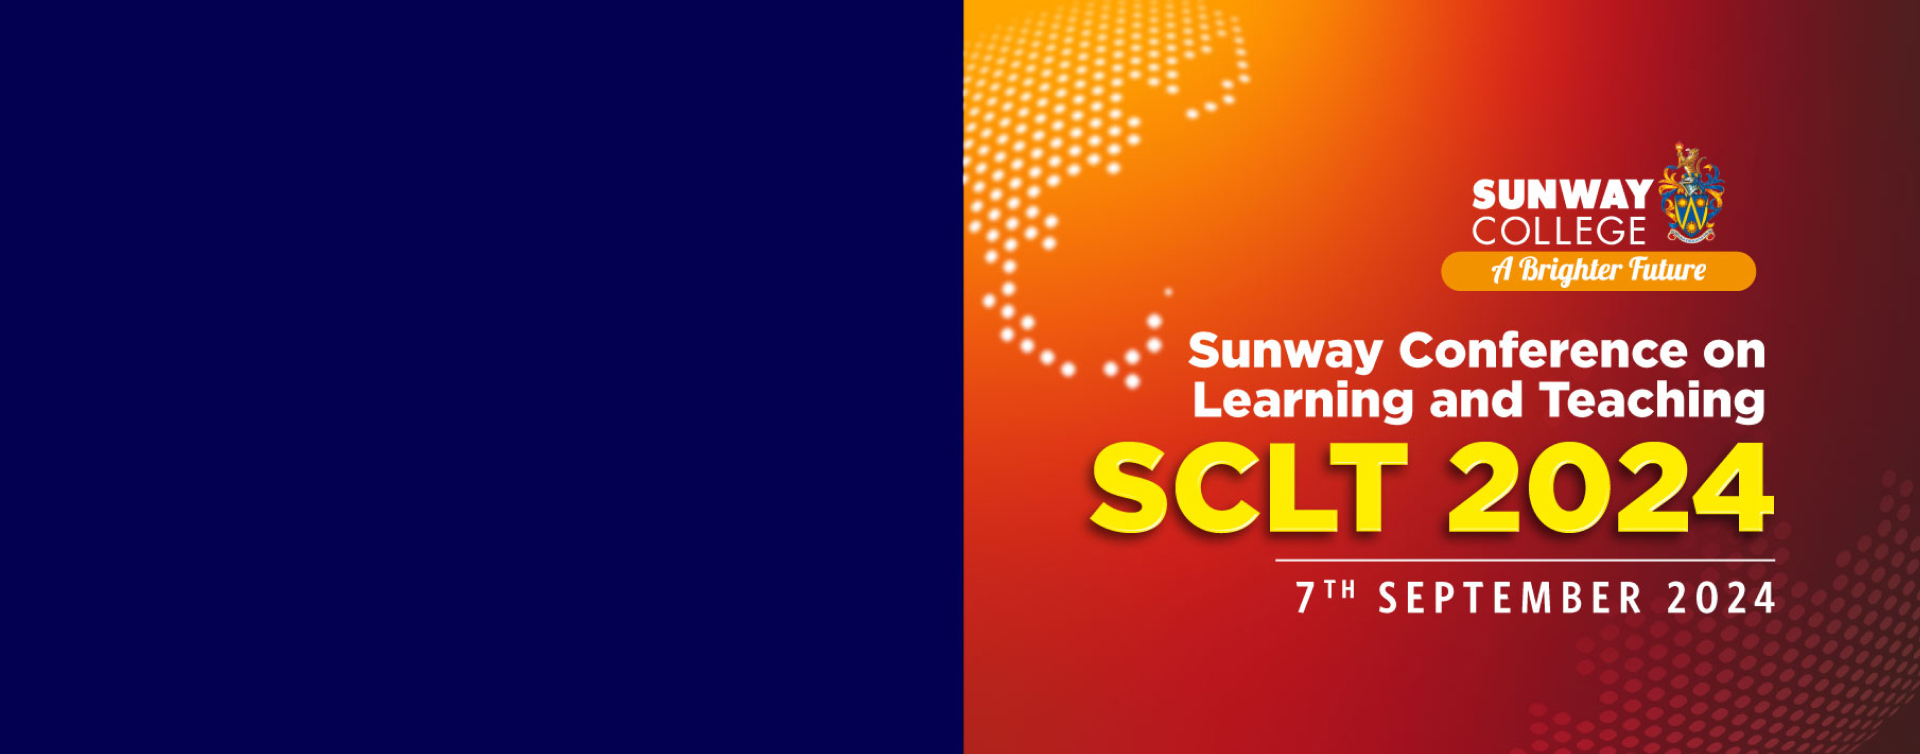 Sunway Conference on Teaching and Learning (SCLT)